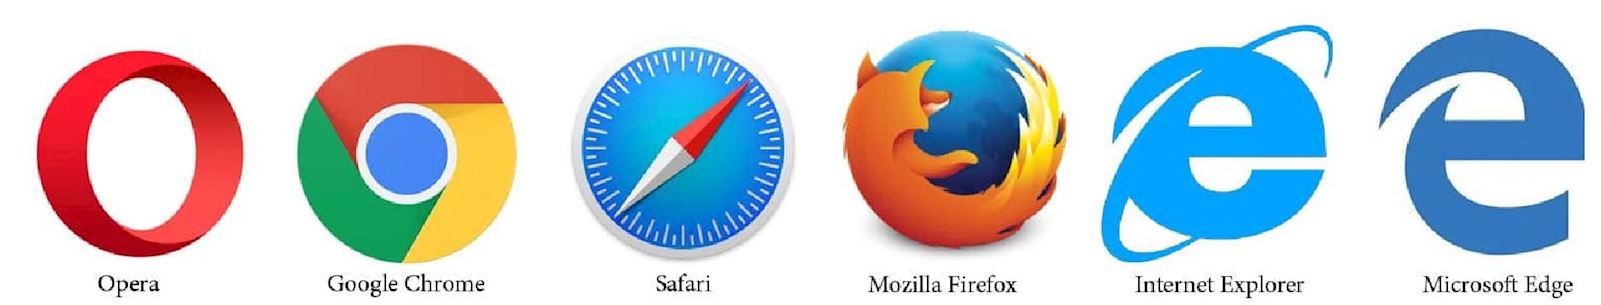 Examples of Browser graphics